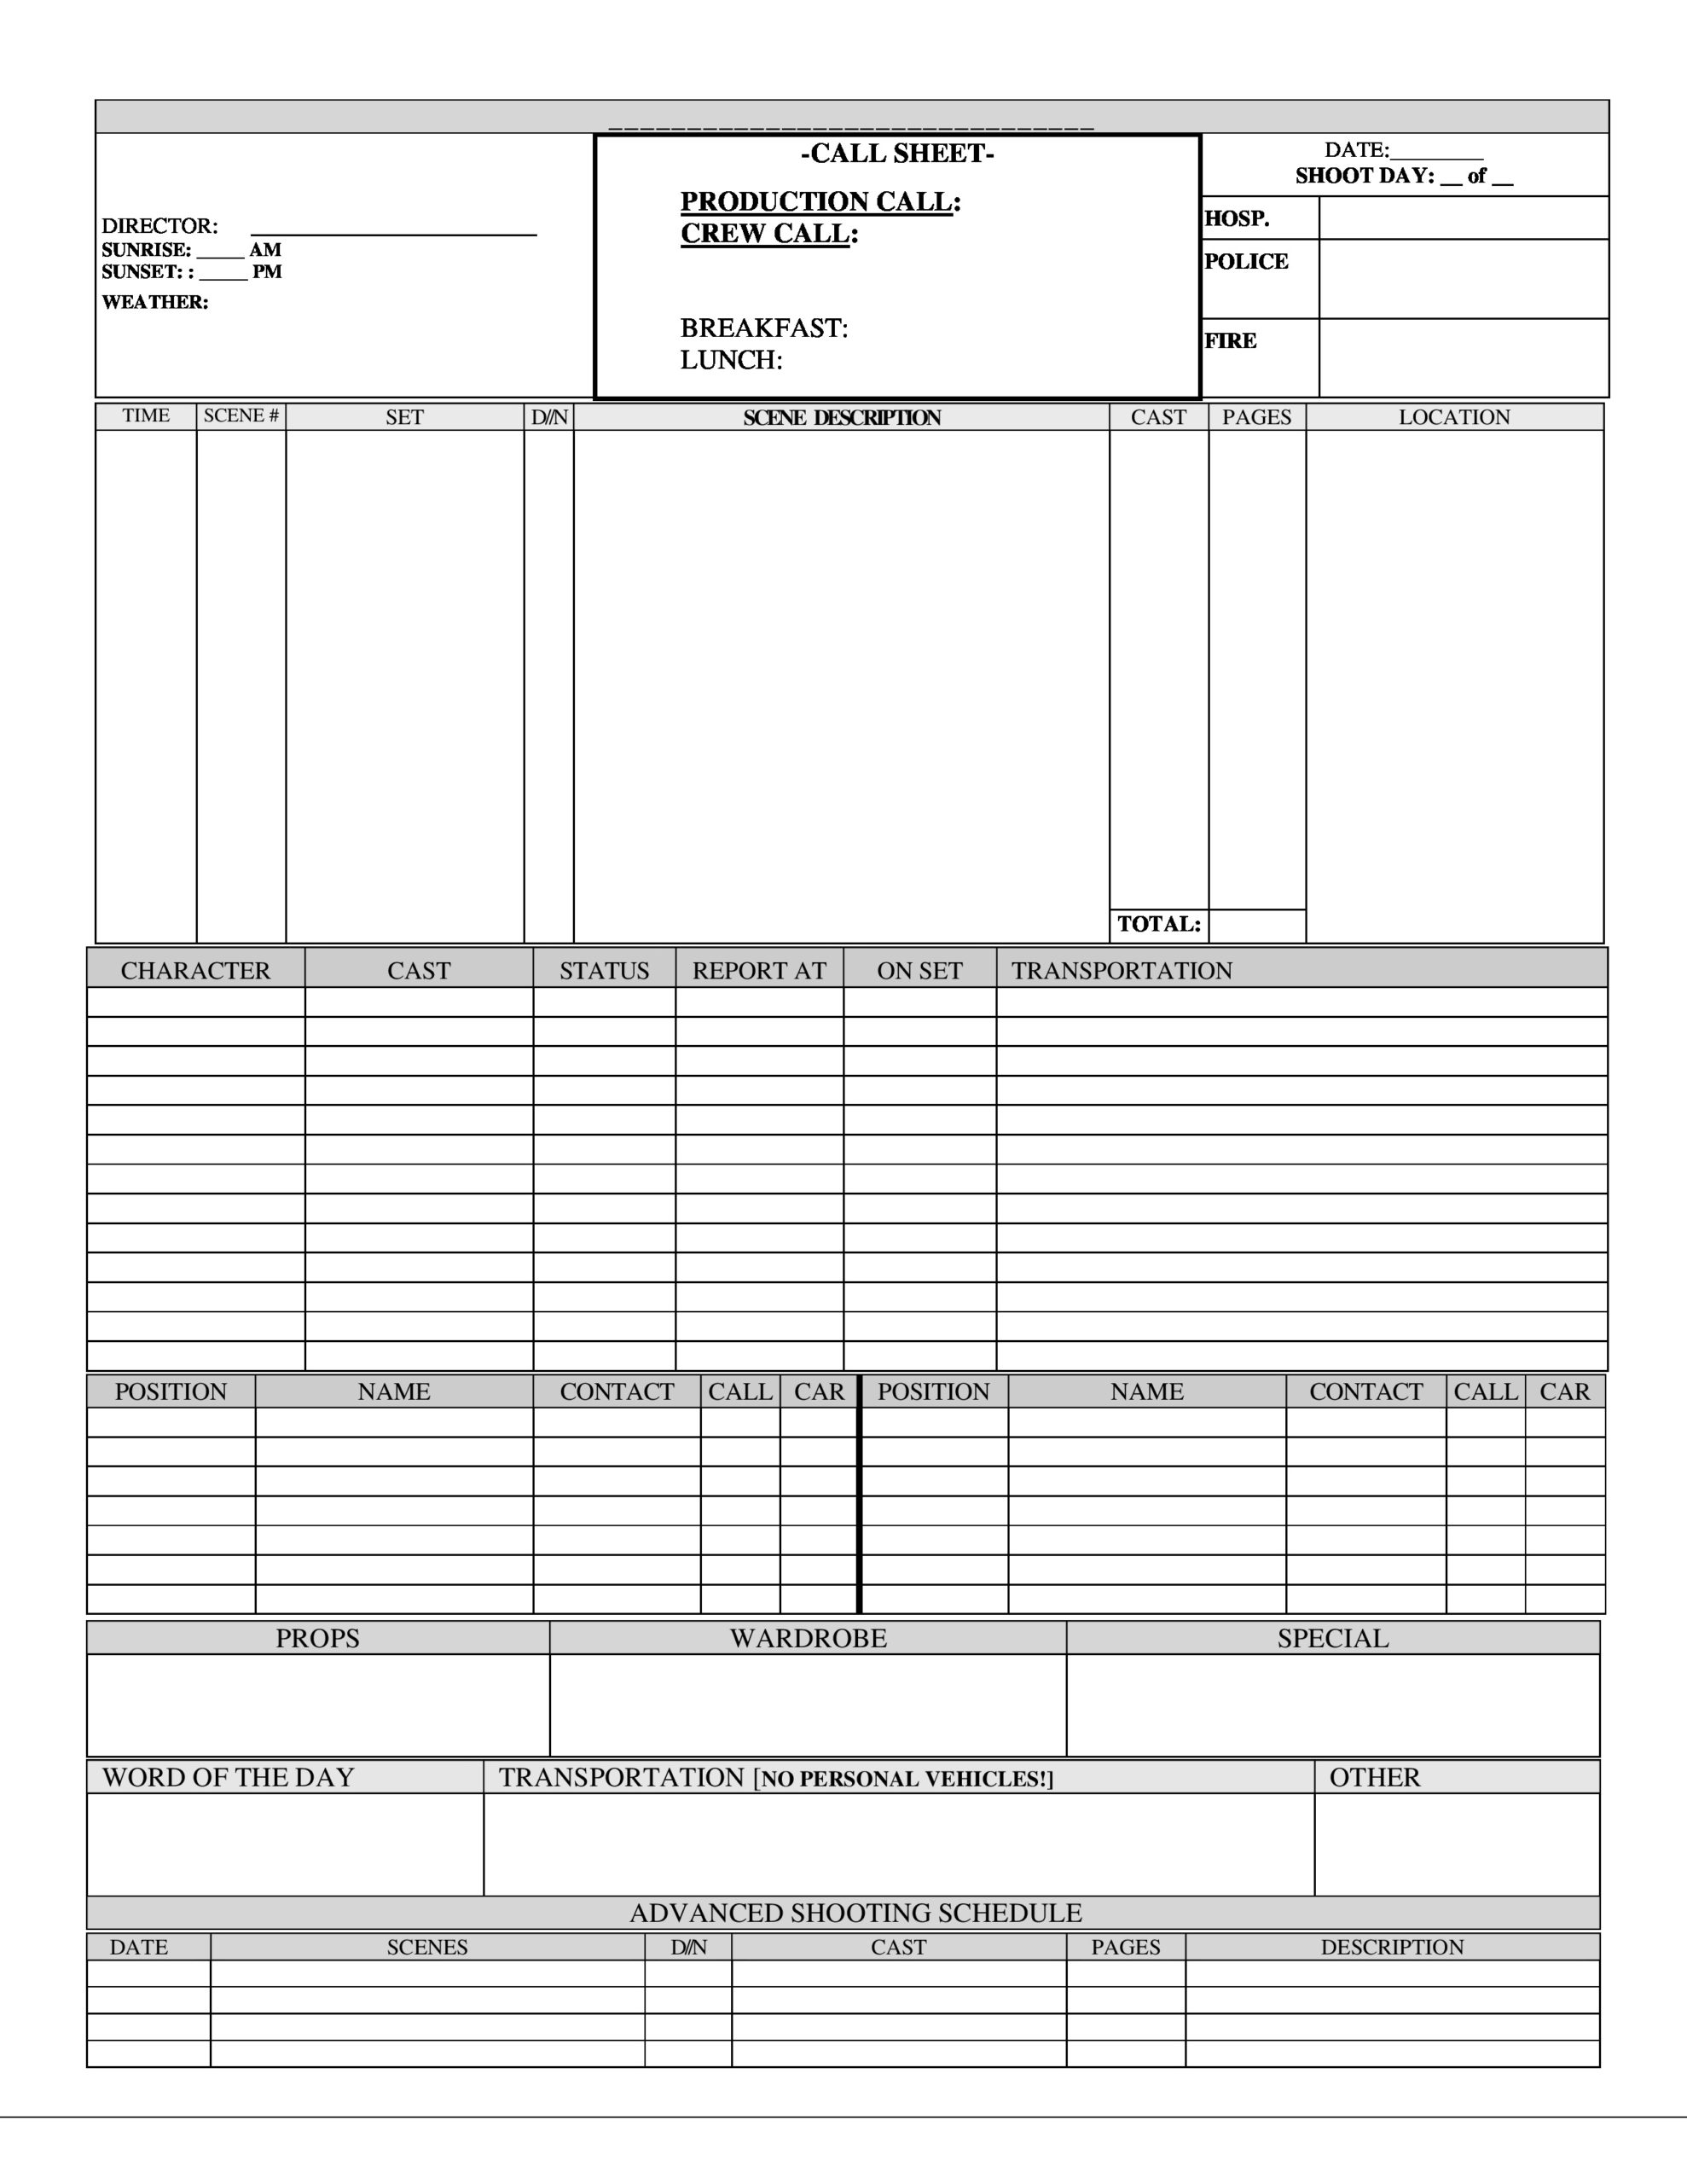 20 Free Call Sheet Templates Beverly Boy Productions